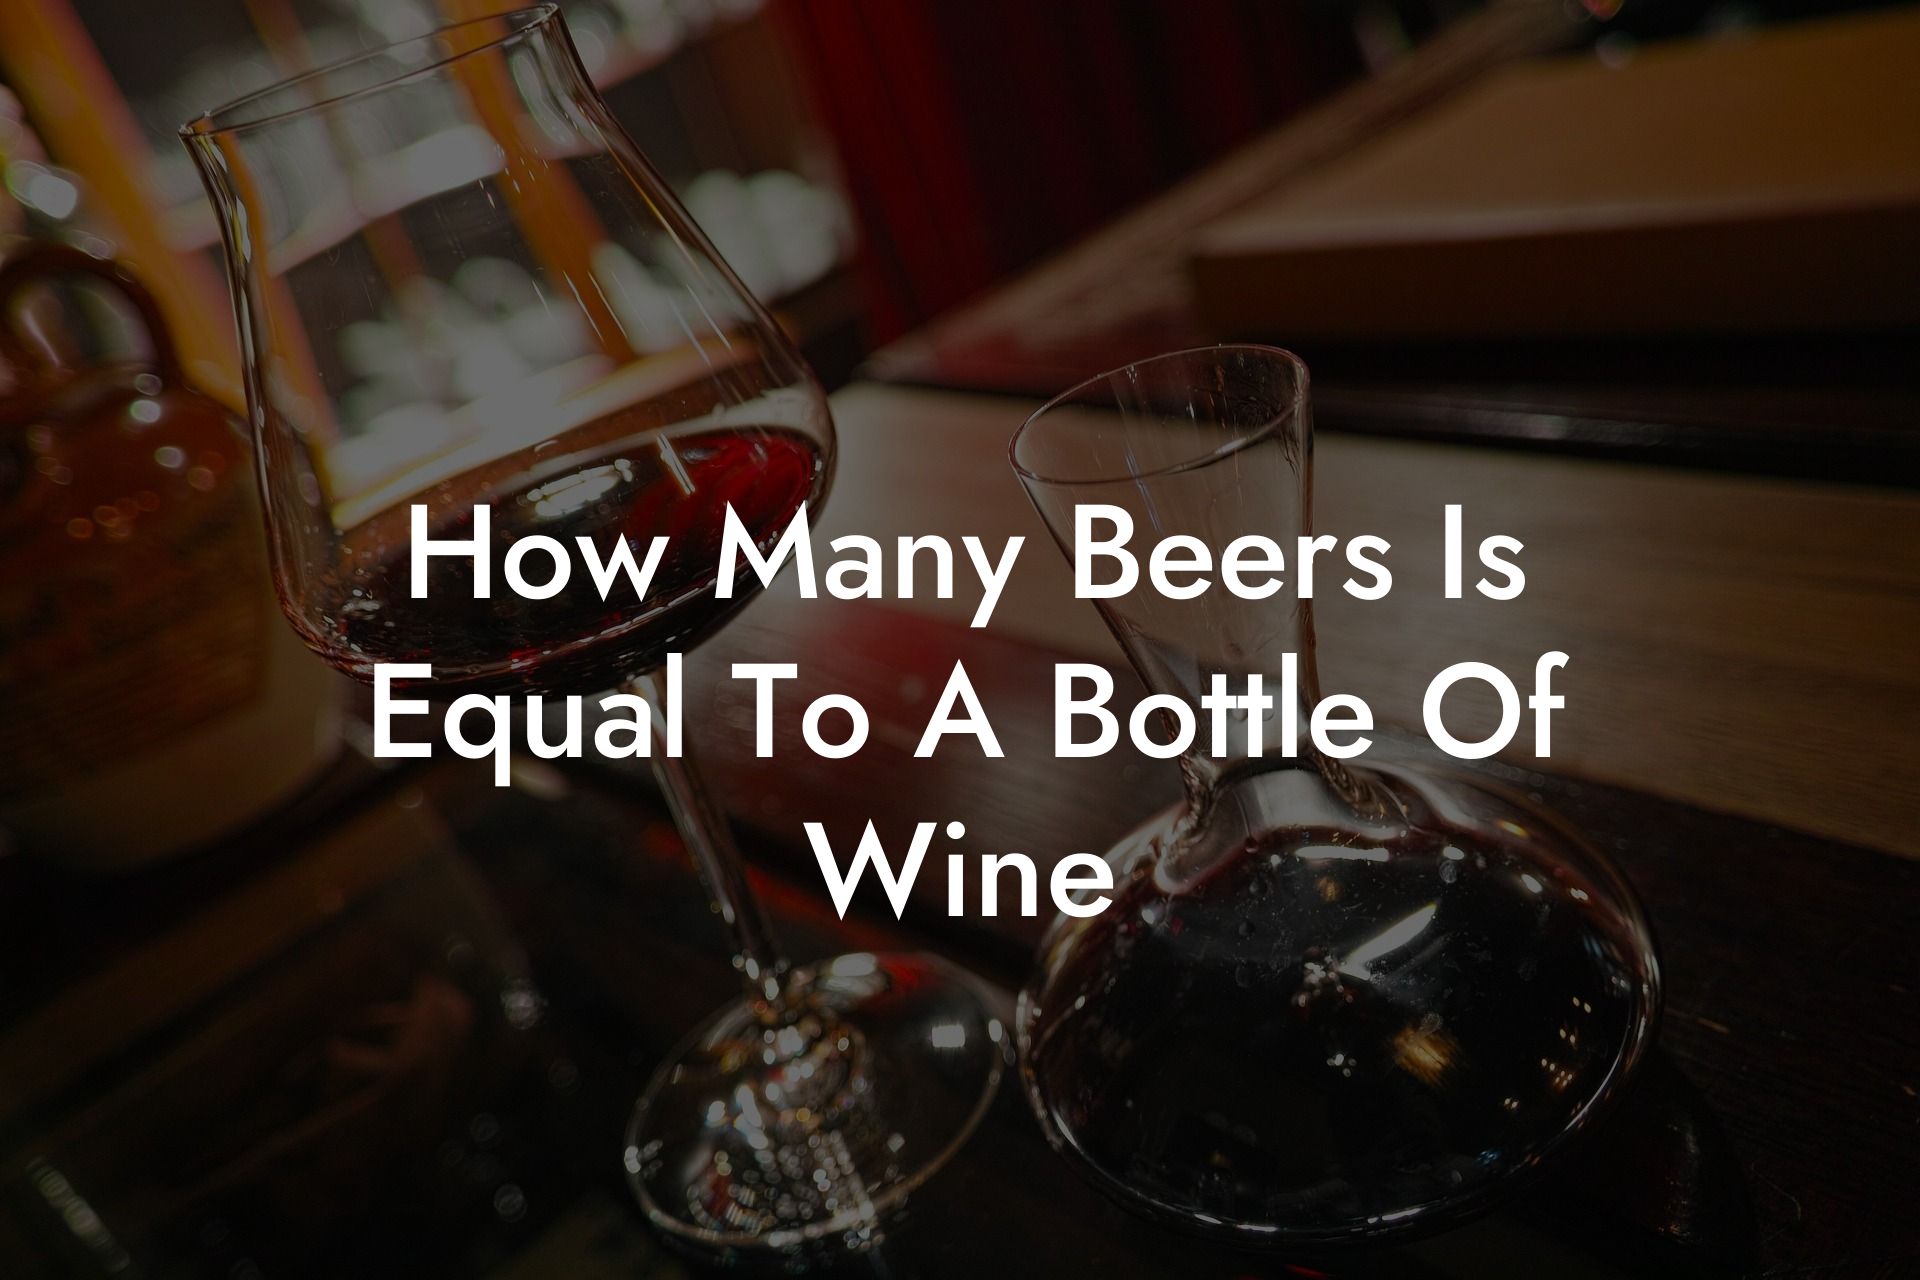 How Many Beers Is Equal To A Bottle Of Wine